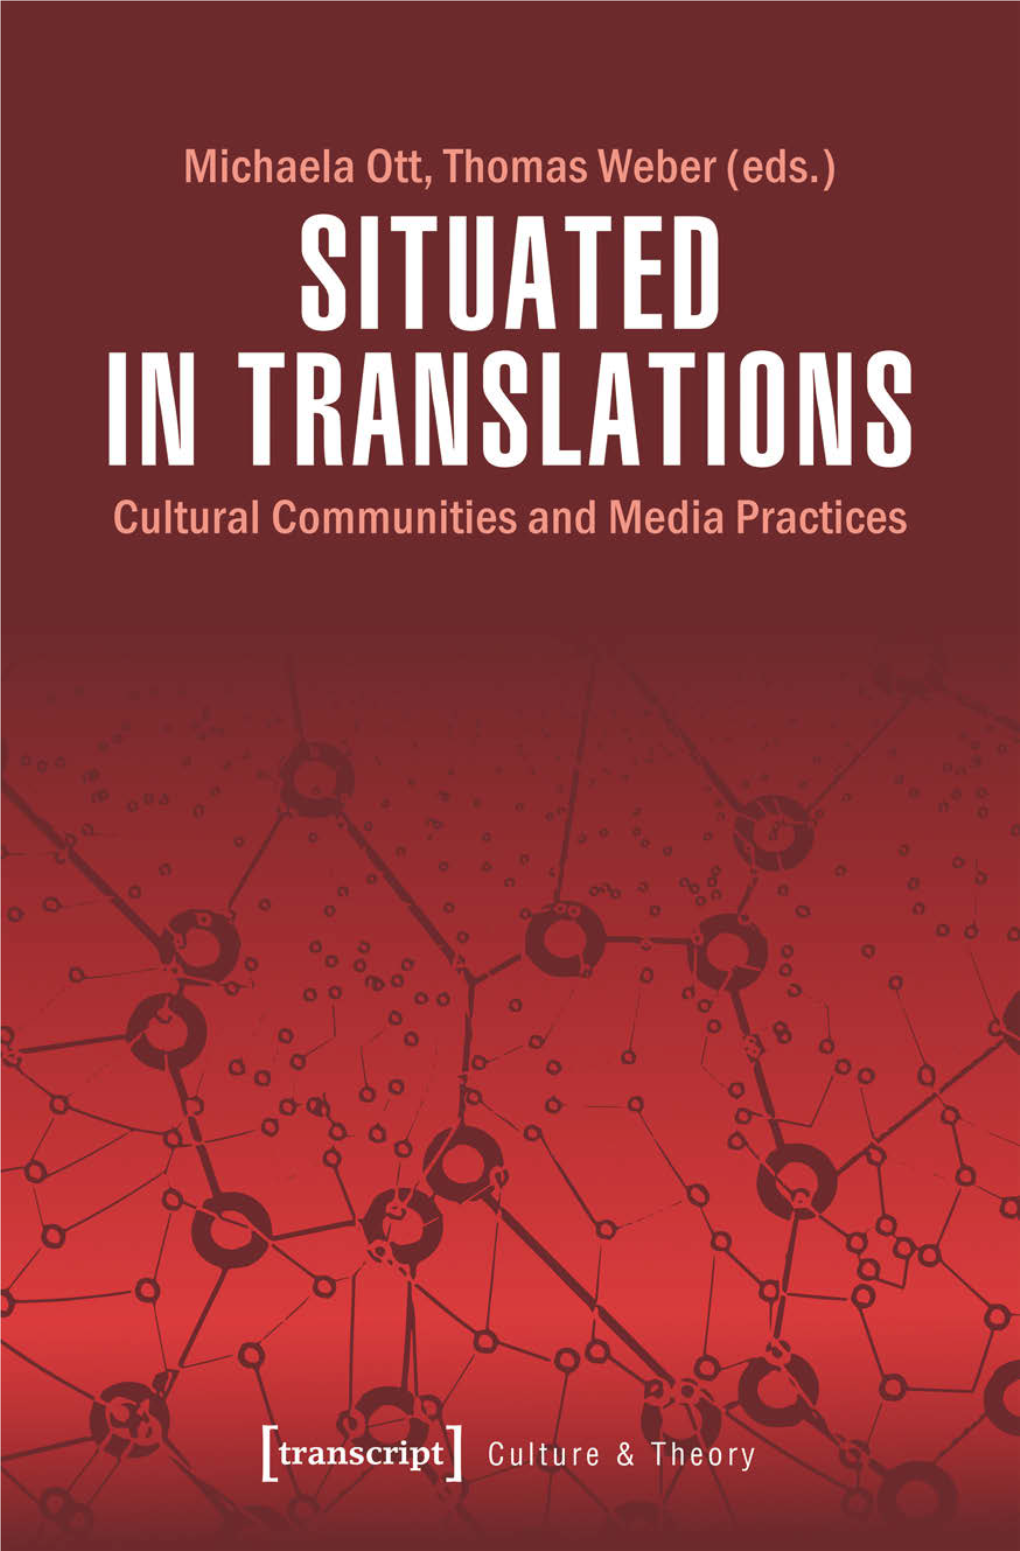 Situated in Translations Cultural Communities and Media Practices